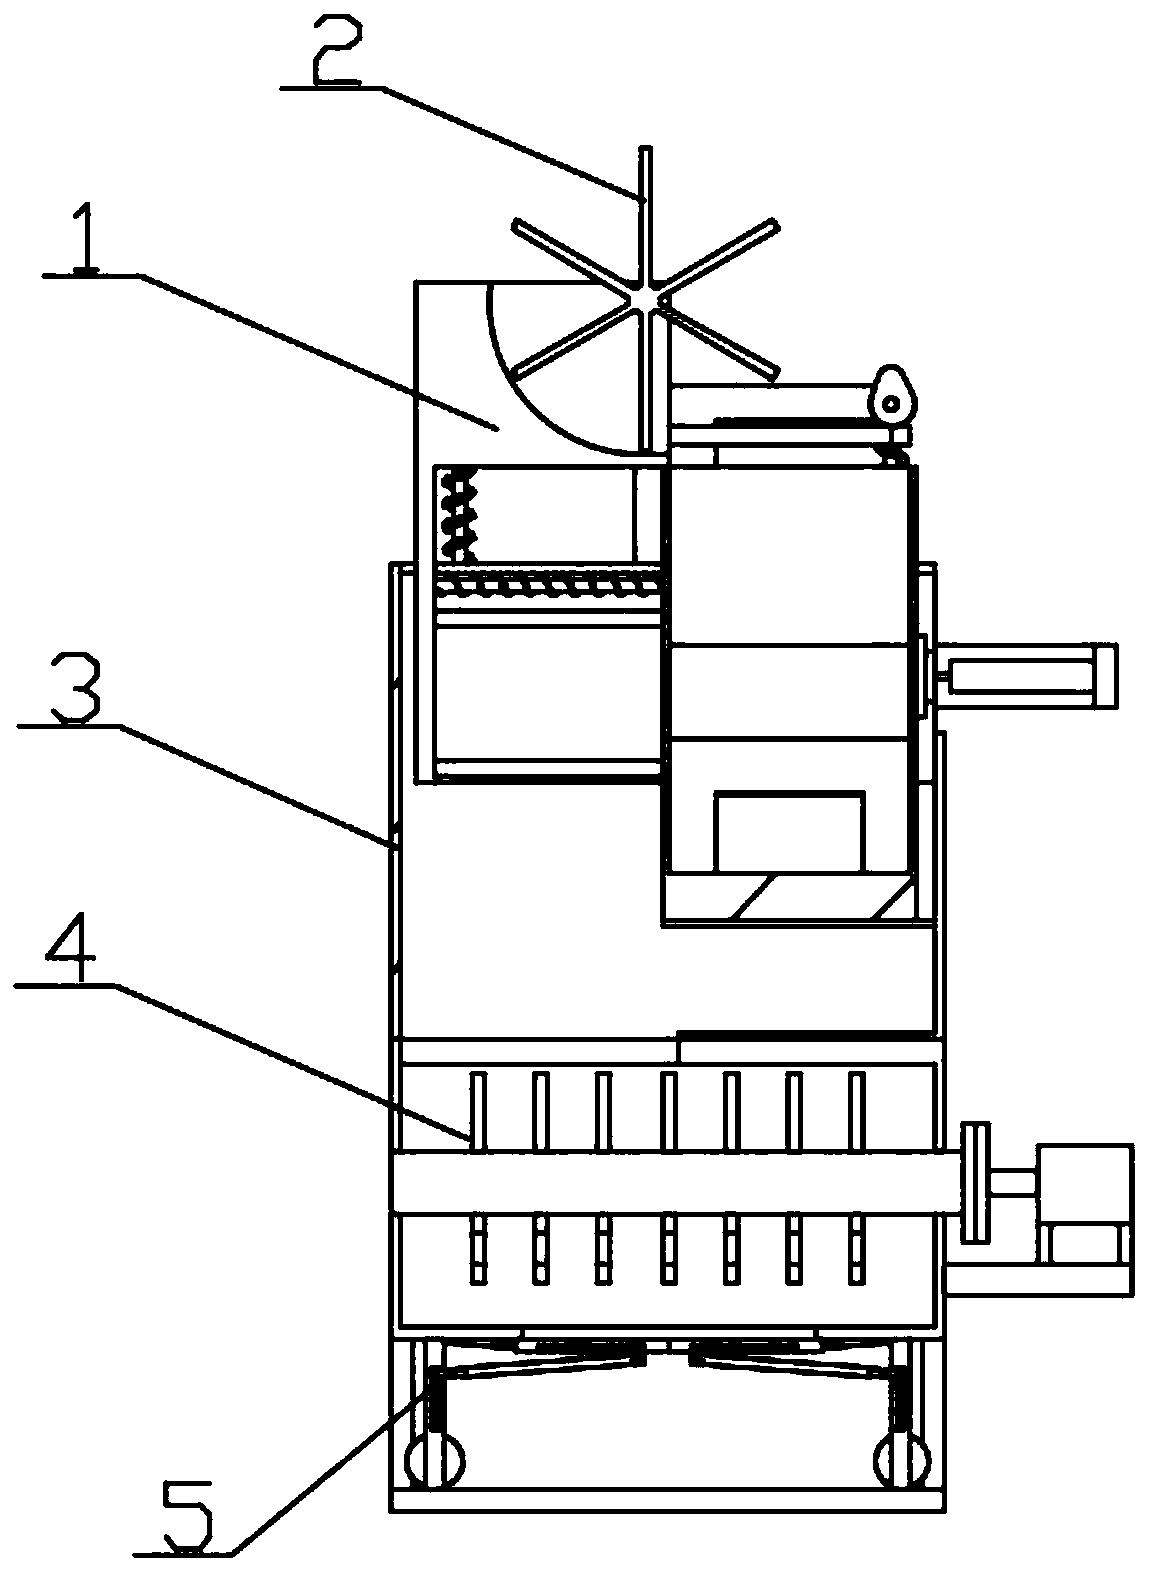 Needle tube recycling and processing device